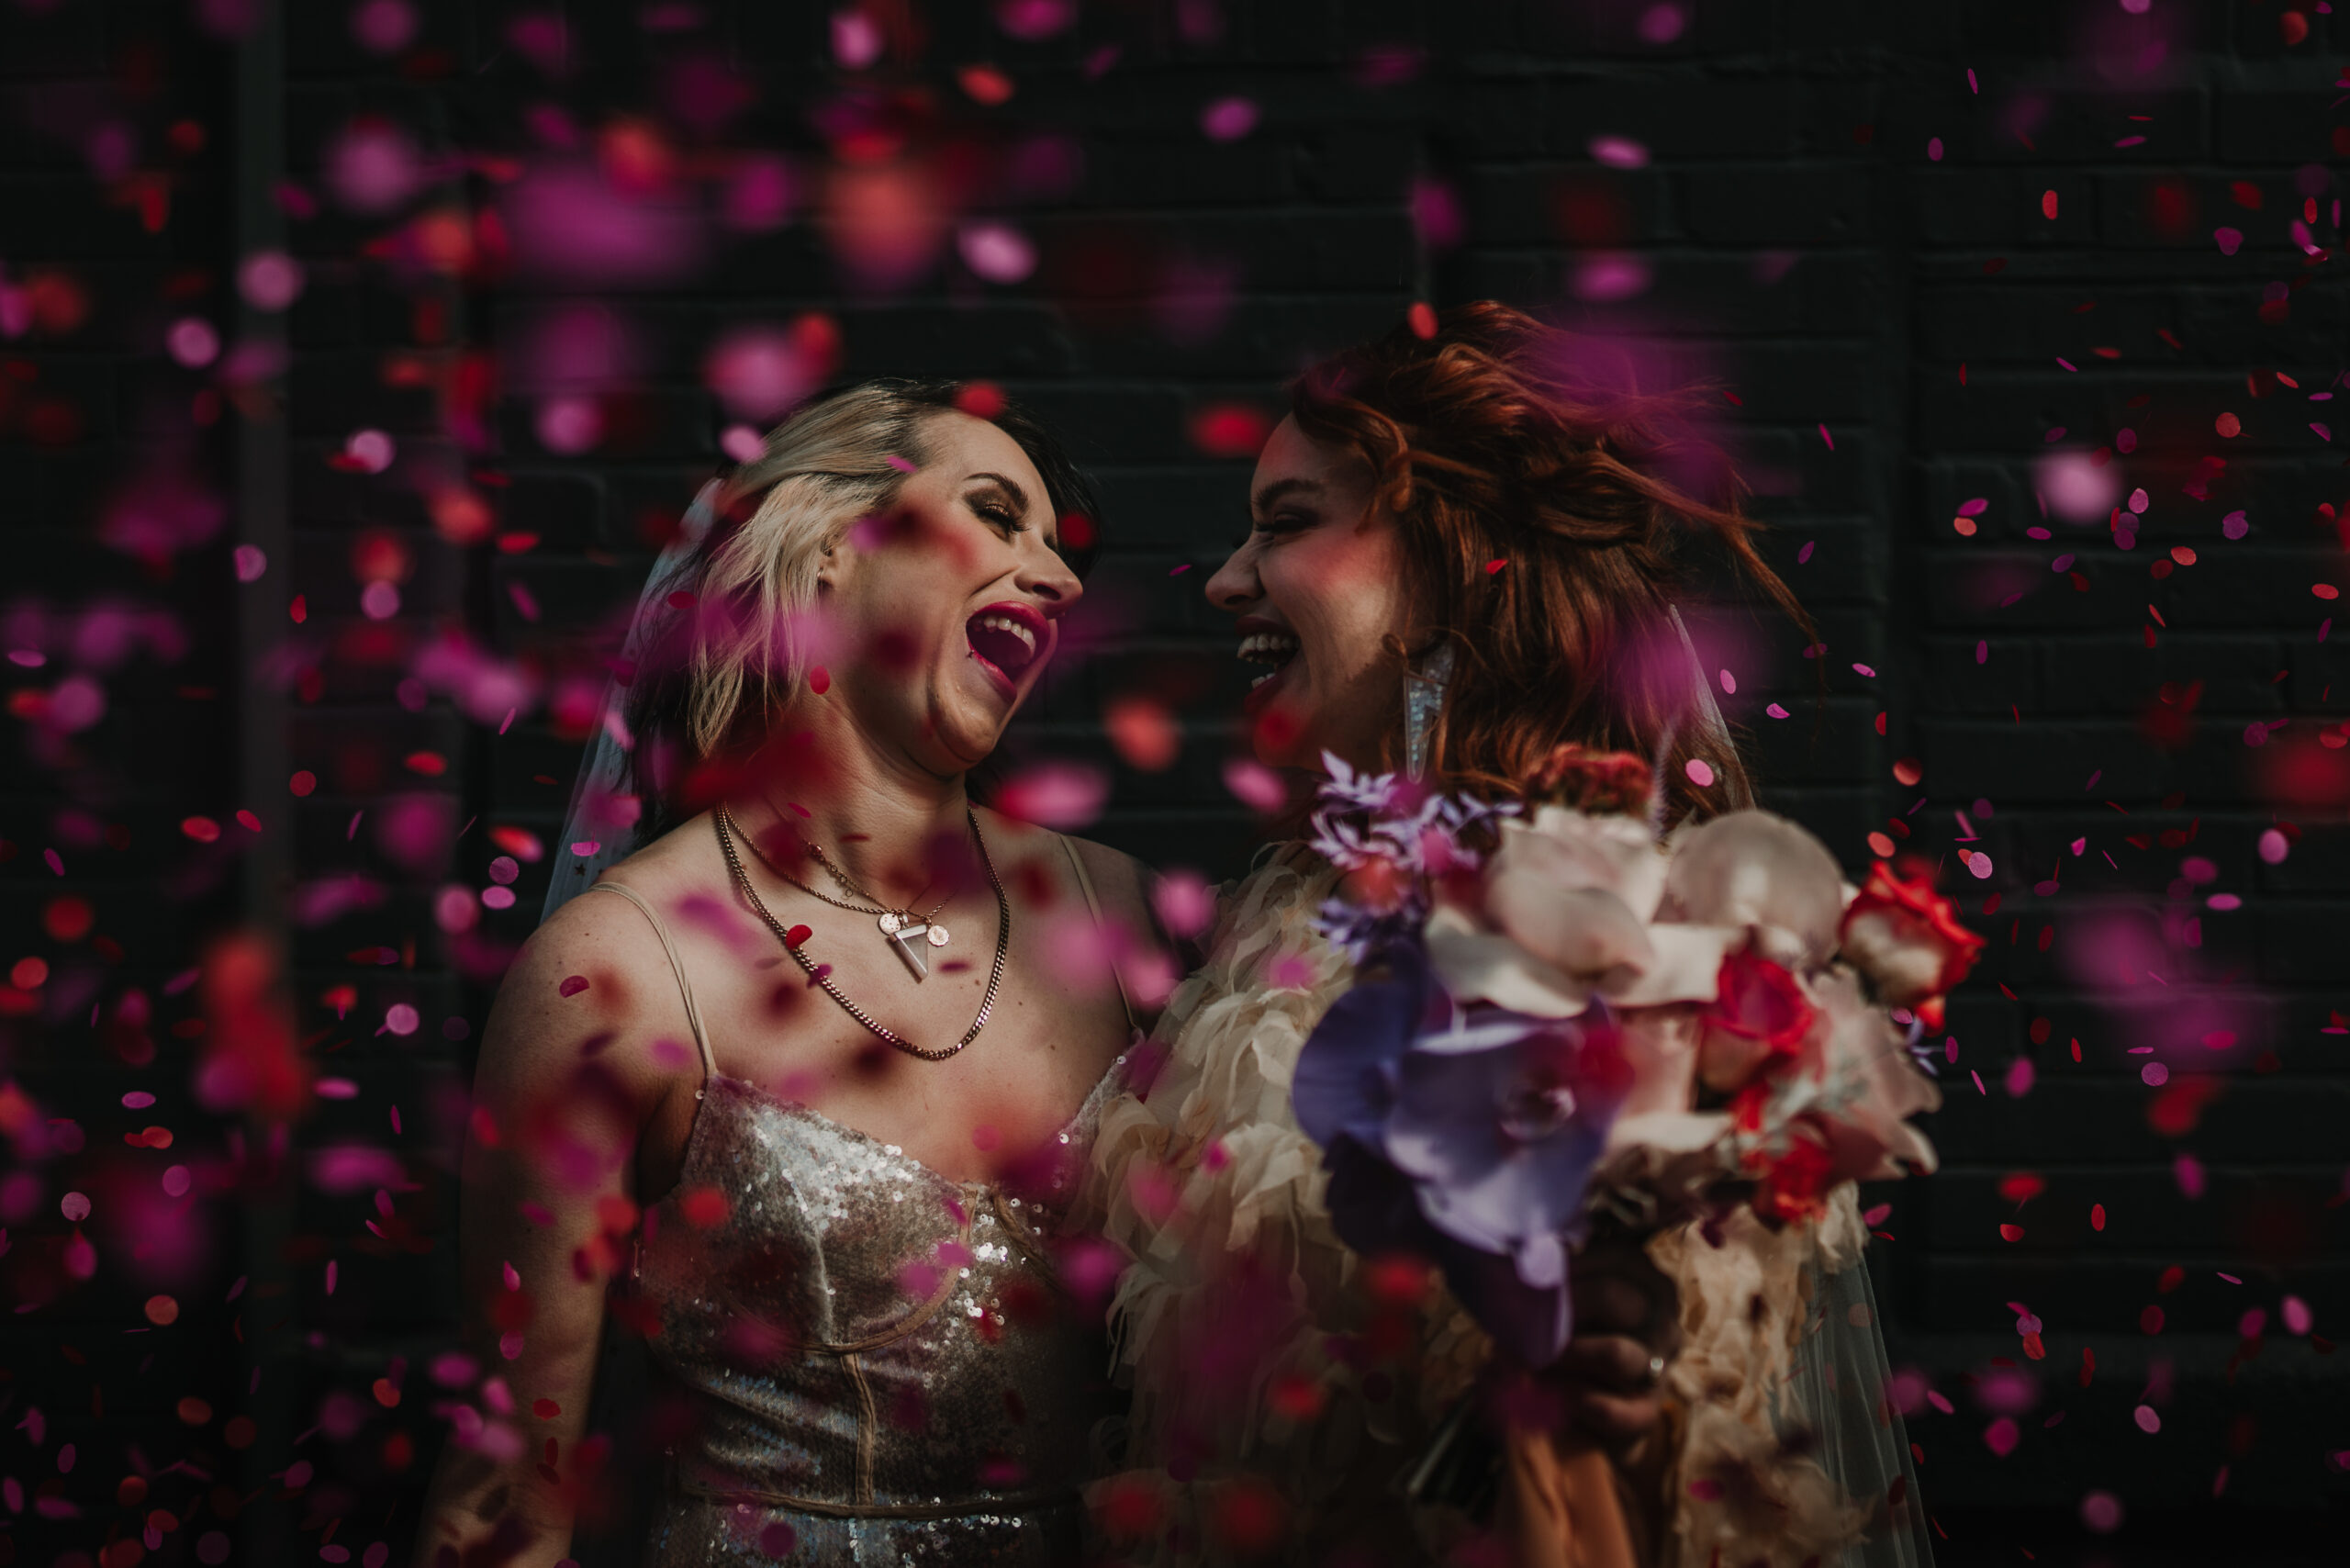 Married couple surrounded by confetti